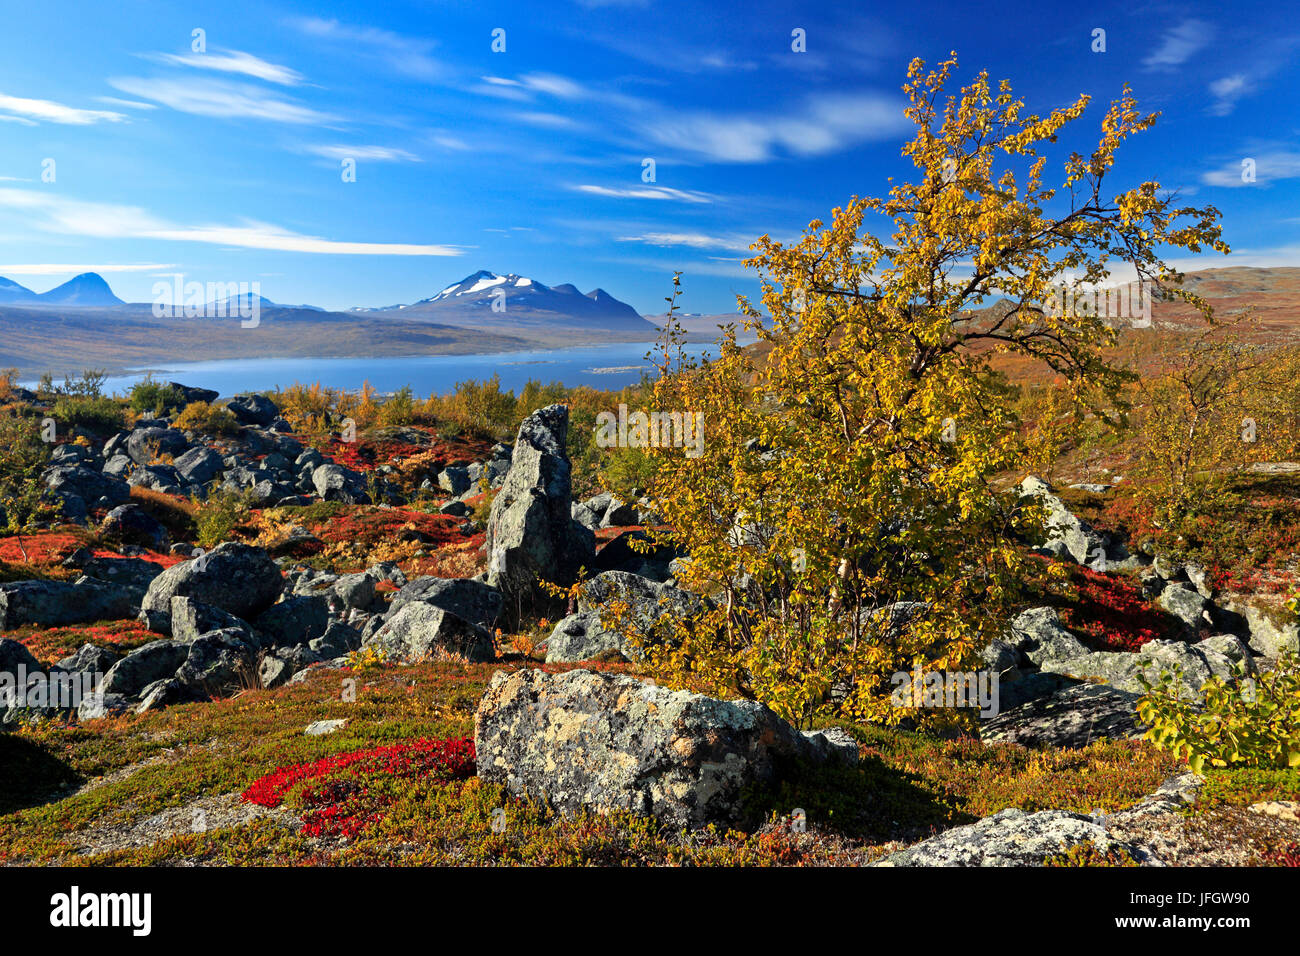 Europe, Sweden, Lapland, province of Norrbotten, Stora Sjöfallets national park, view of the Kungsleden about the Akkajaure on the Akka mountain massif Stock Photo